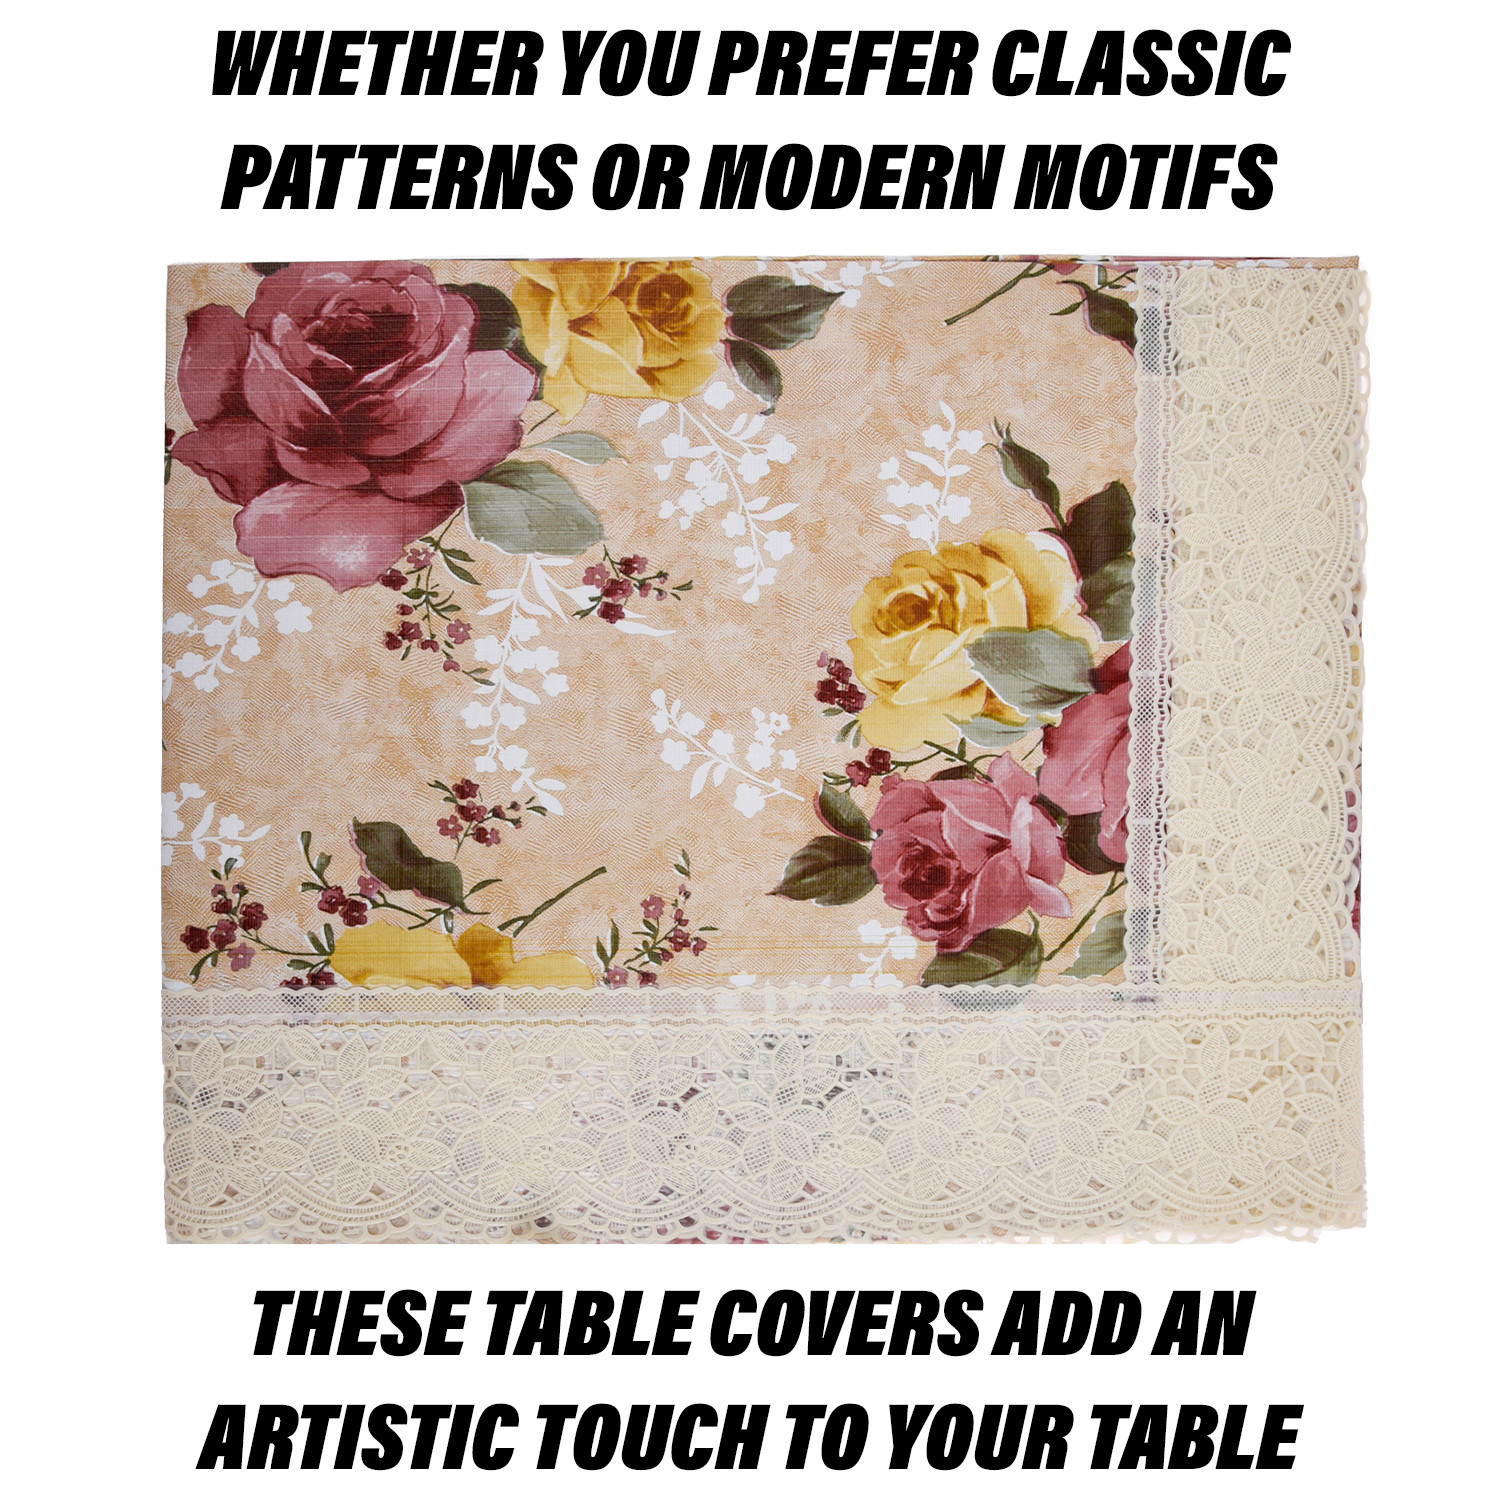 Kuber Industries Dining Table Cover | PVC Table Cover | Reusable Cloth Cover for Table Top | Flower Design Dining Table Cover | Table Protector Cover | 60x90 Inch | Beige